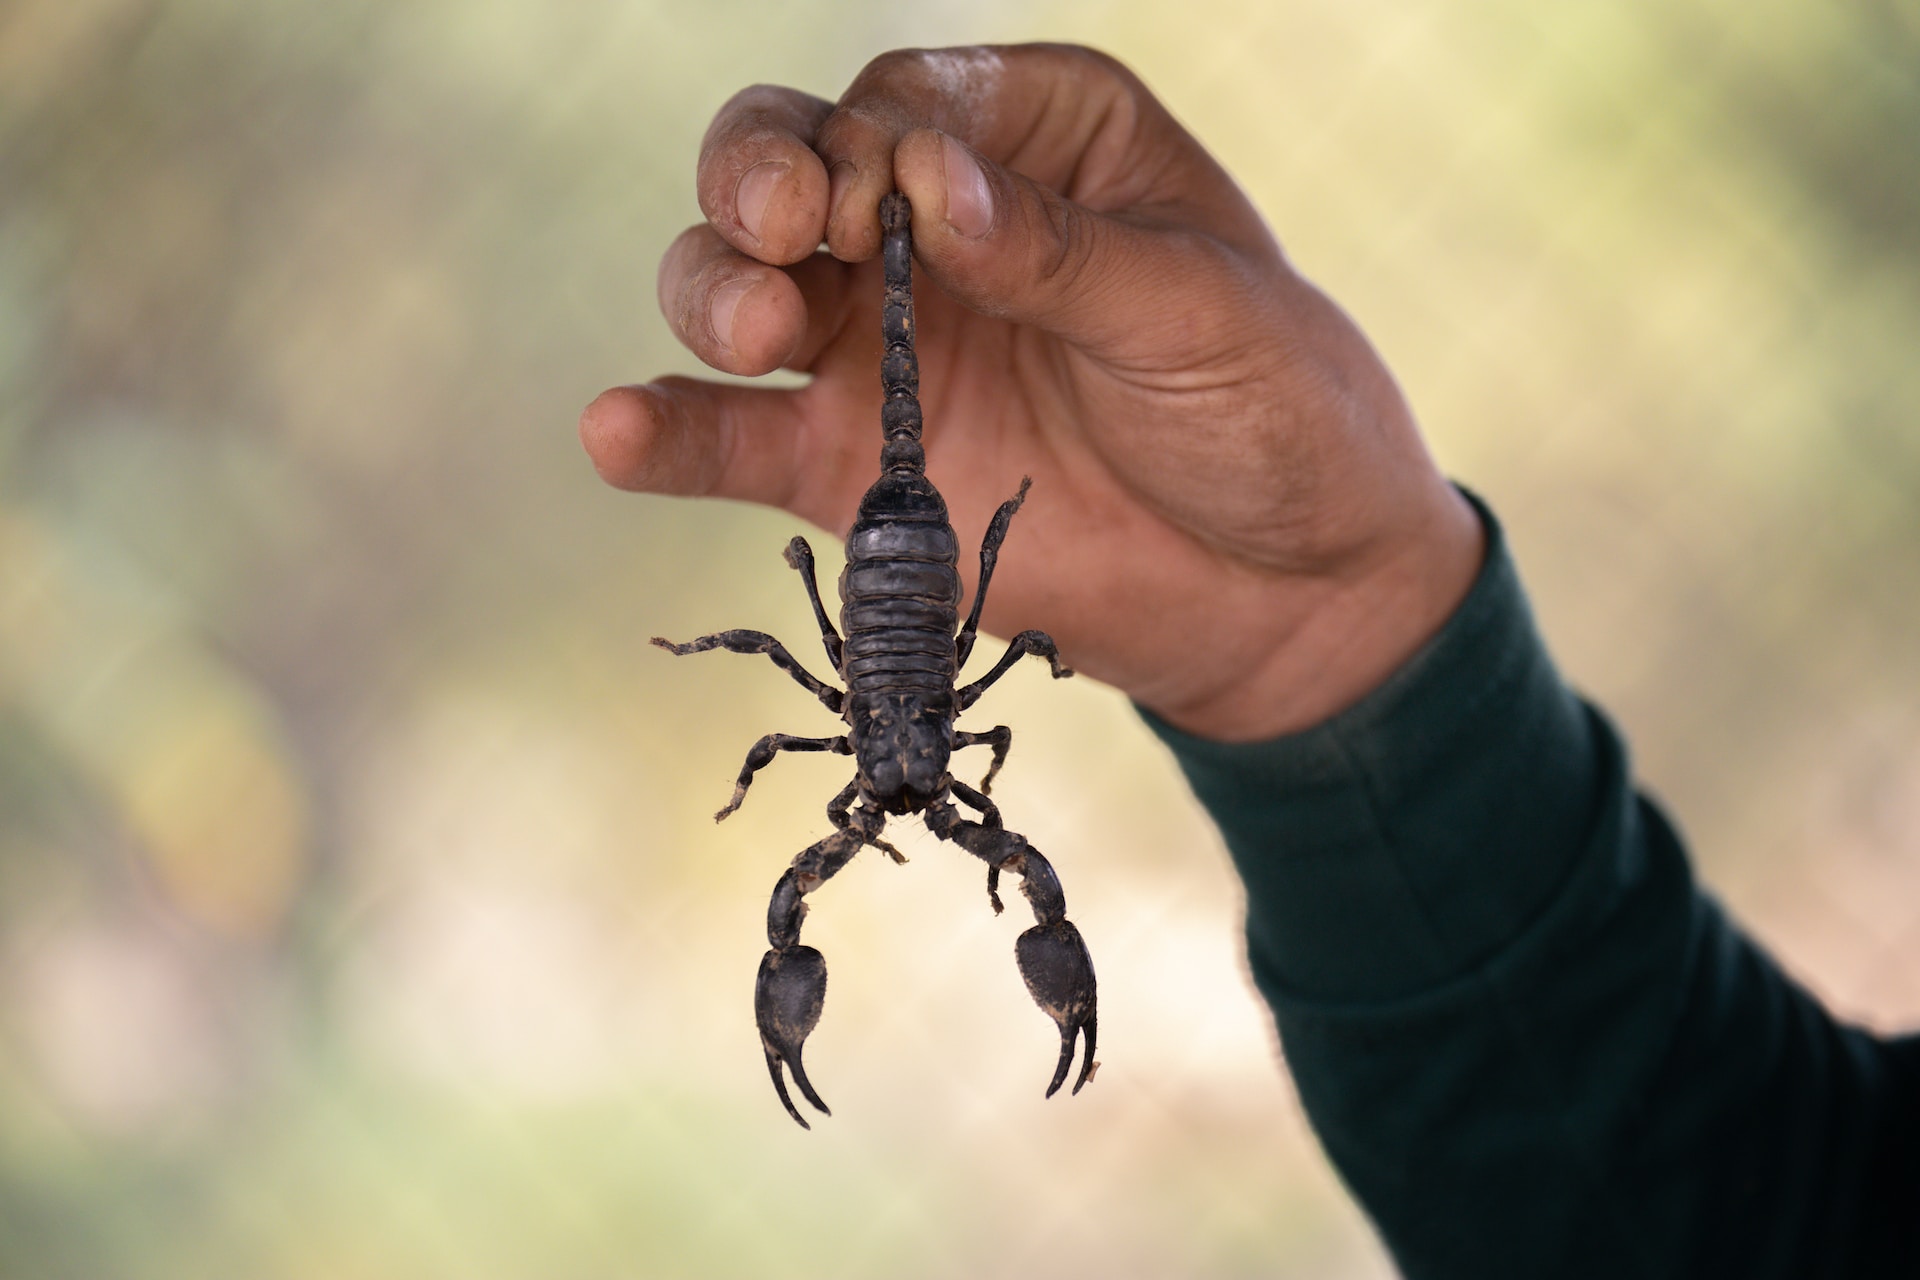 How to treat scorpion stings: 4 essential things you should do - The Manual